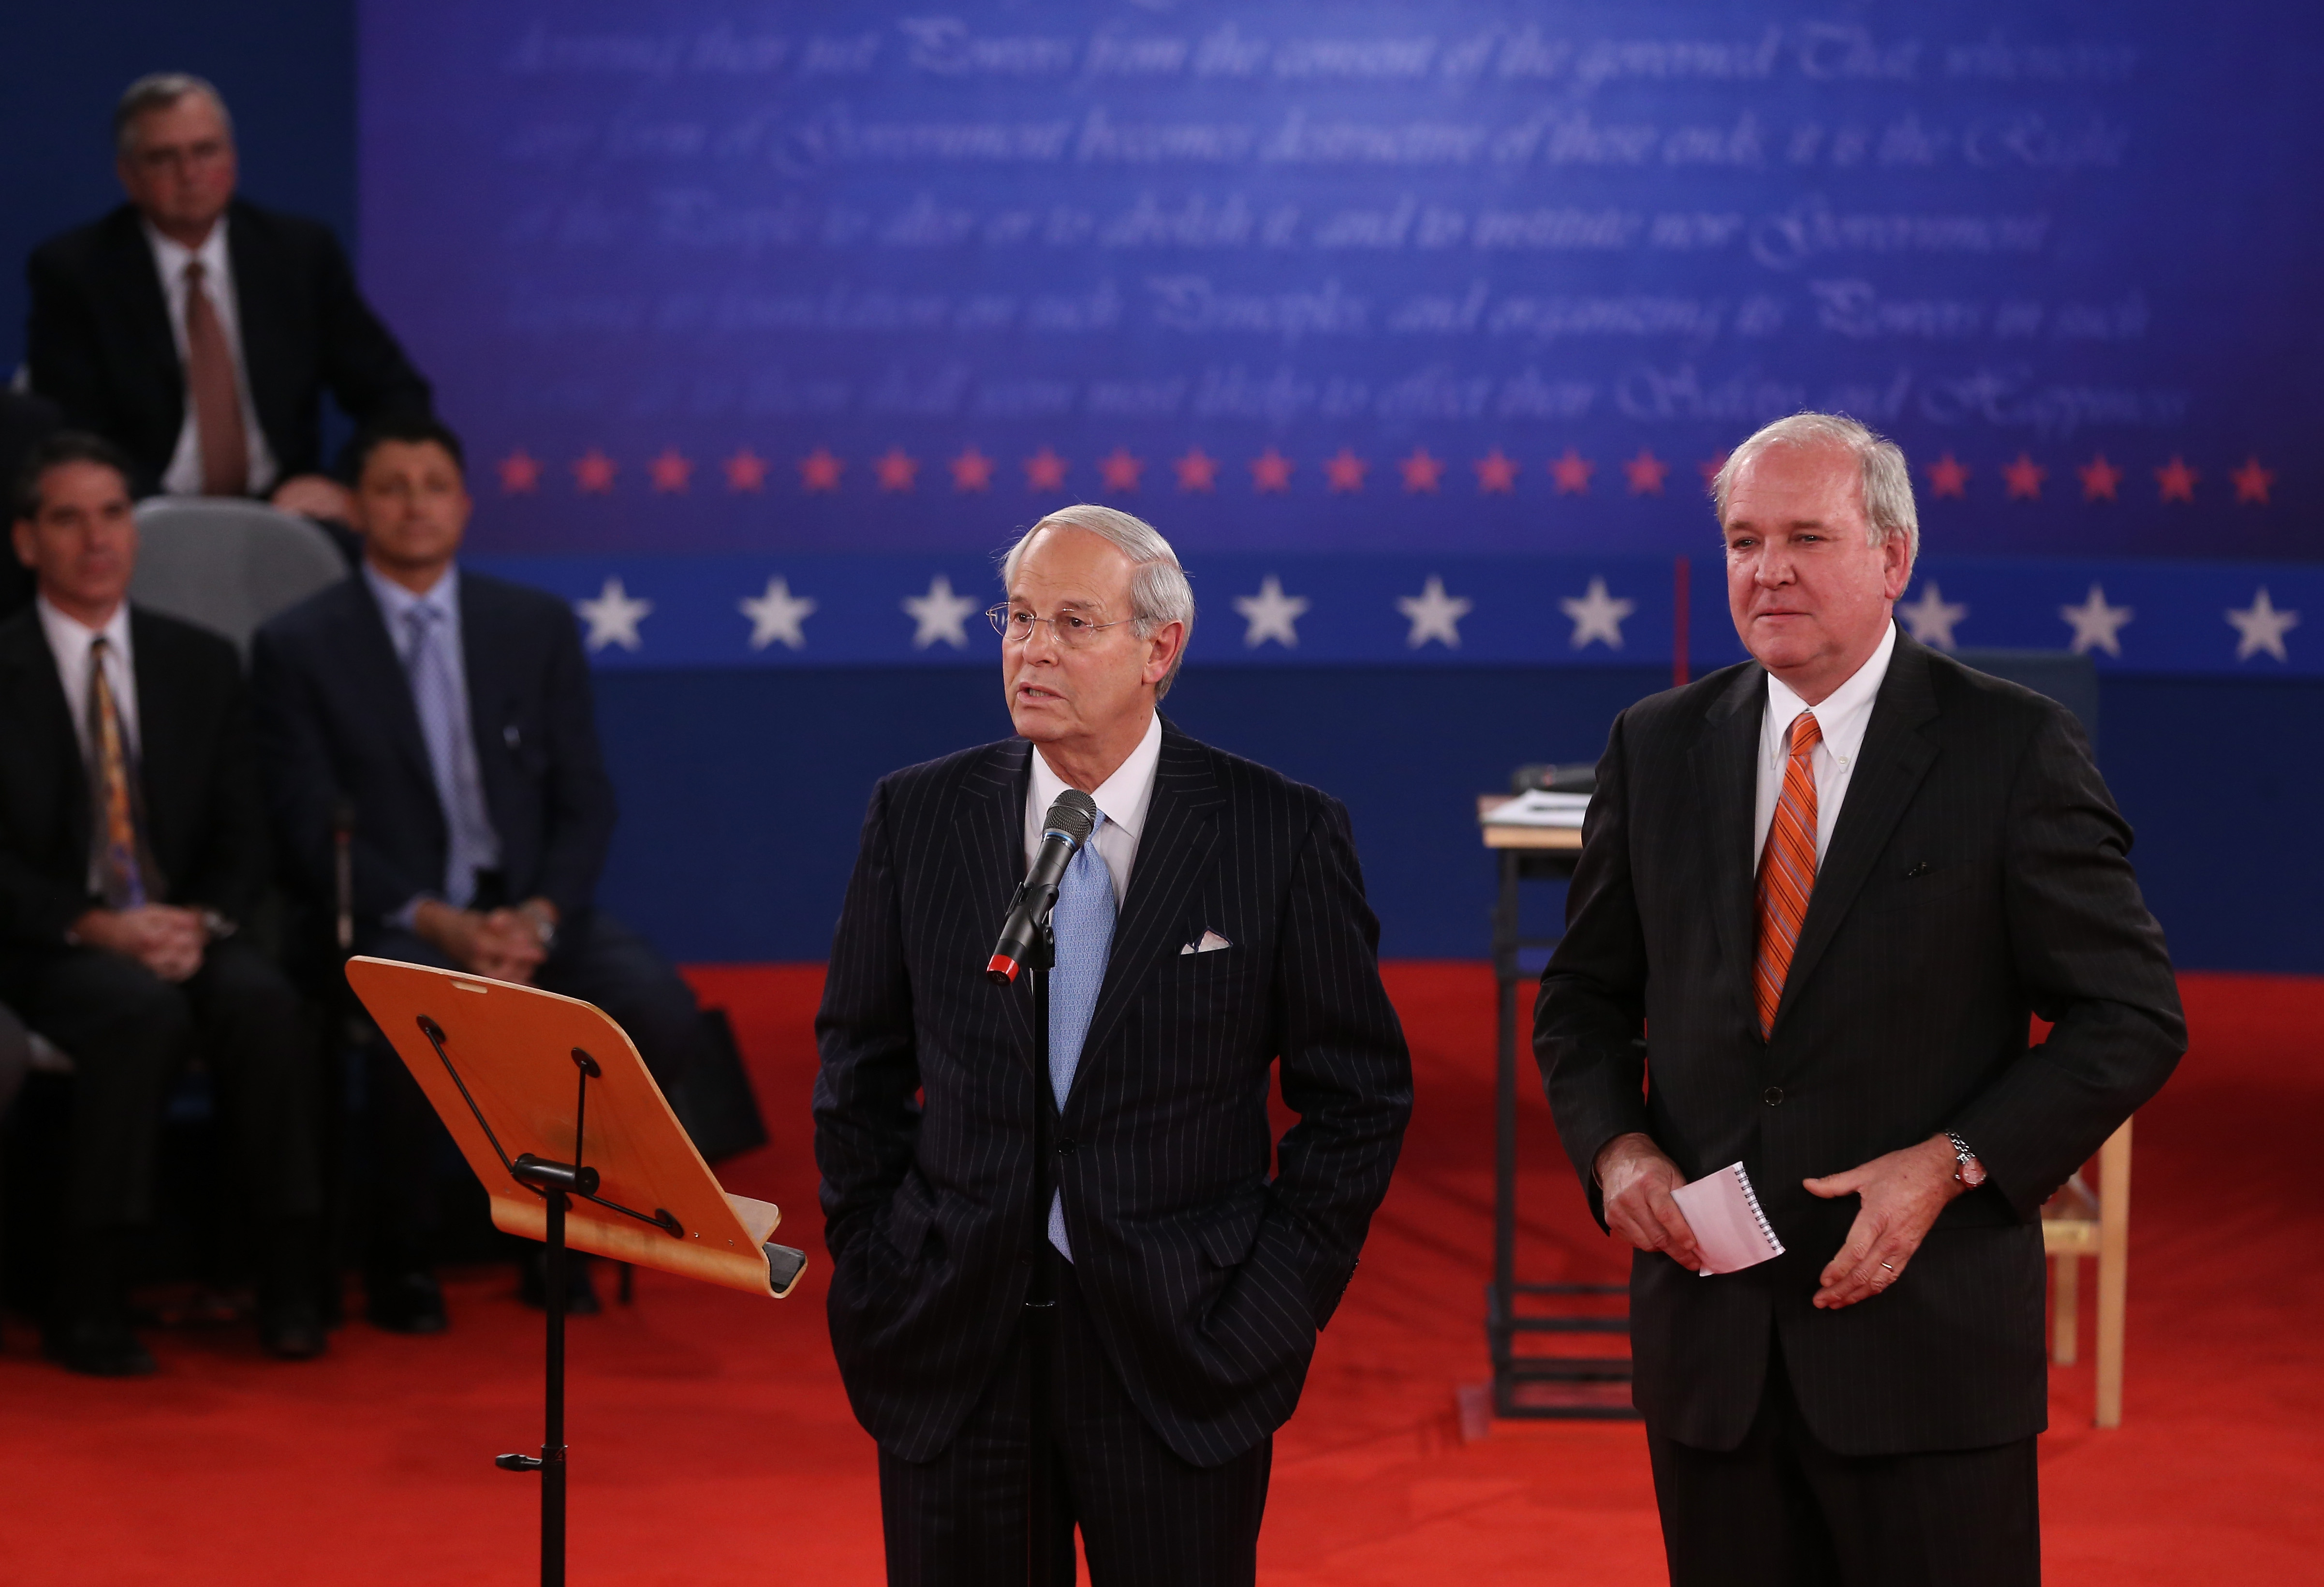 Commission Presidential Debates 5 Facts You Need To Know